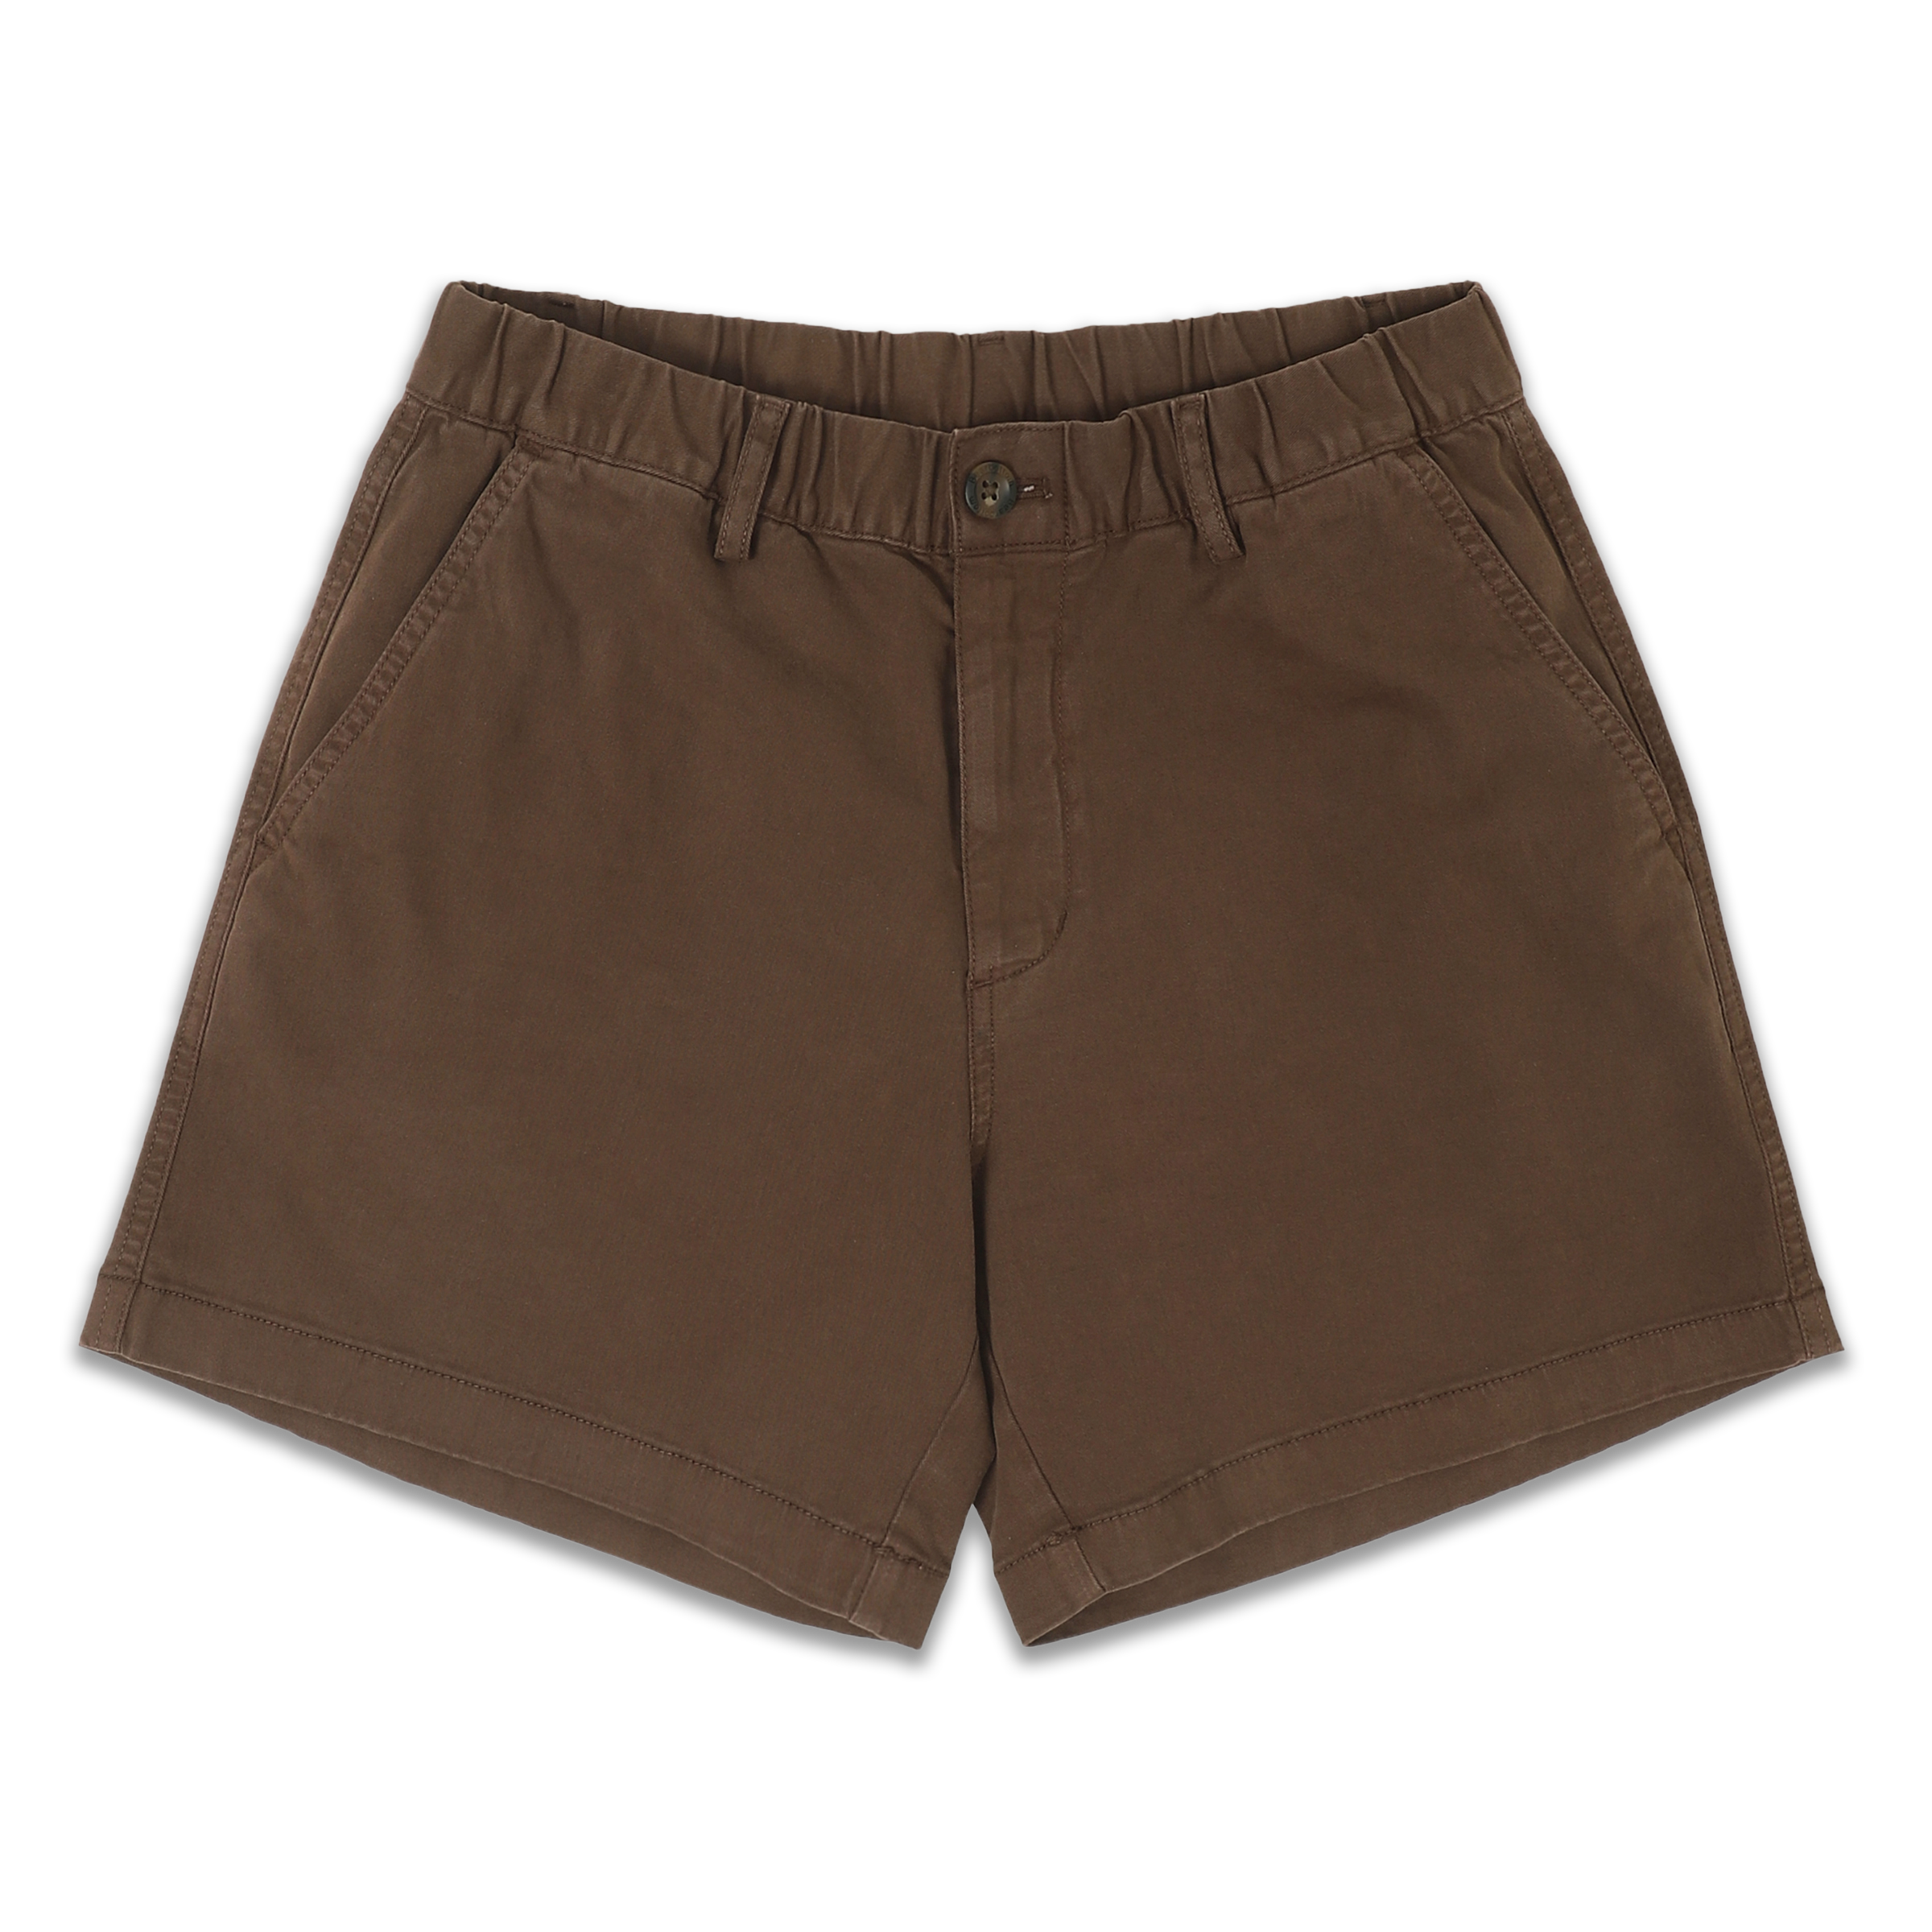 Stretch Short 5.5" Cocoa front with elastic waistband, belt loops, zipper fly, faux horn button, and two inseam pockets